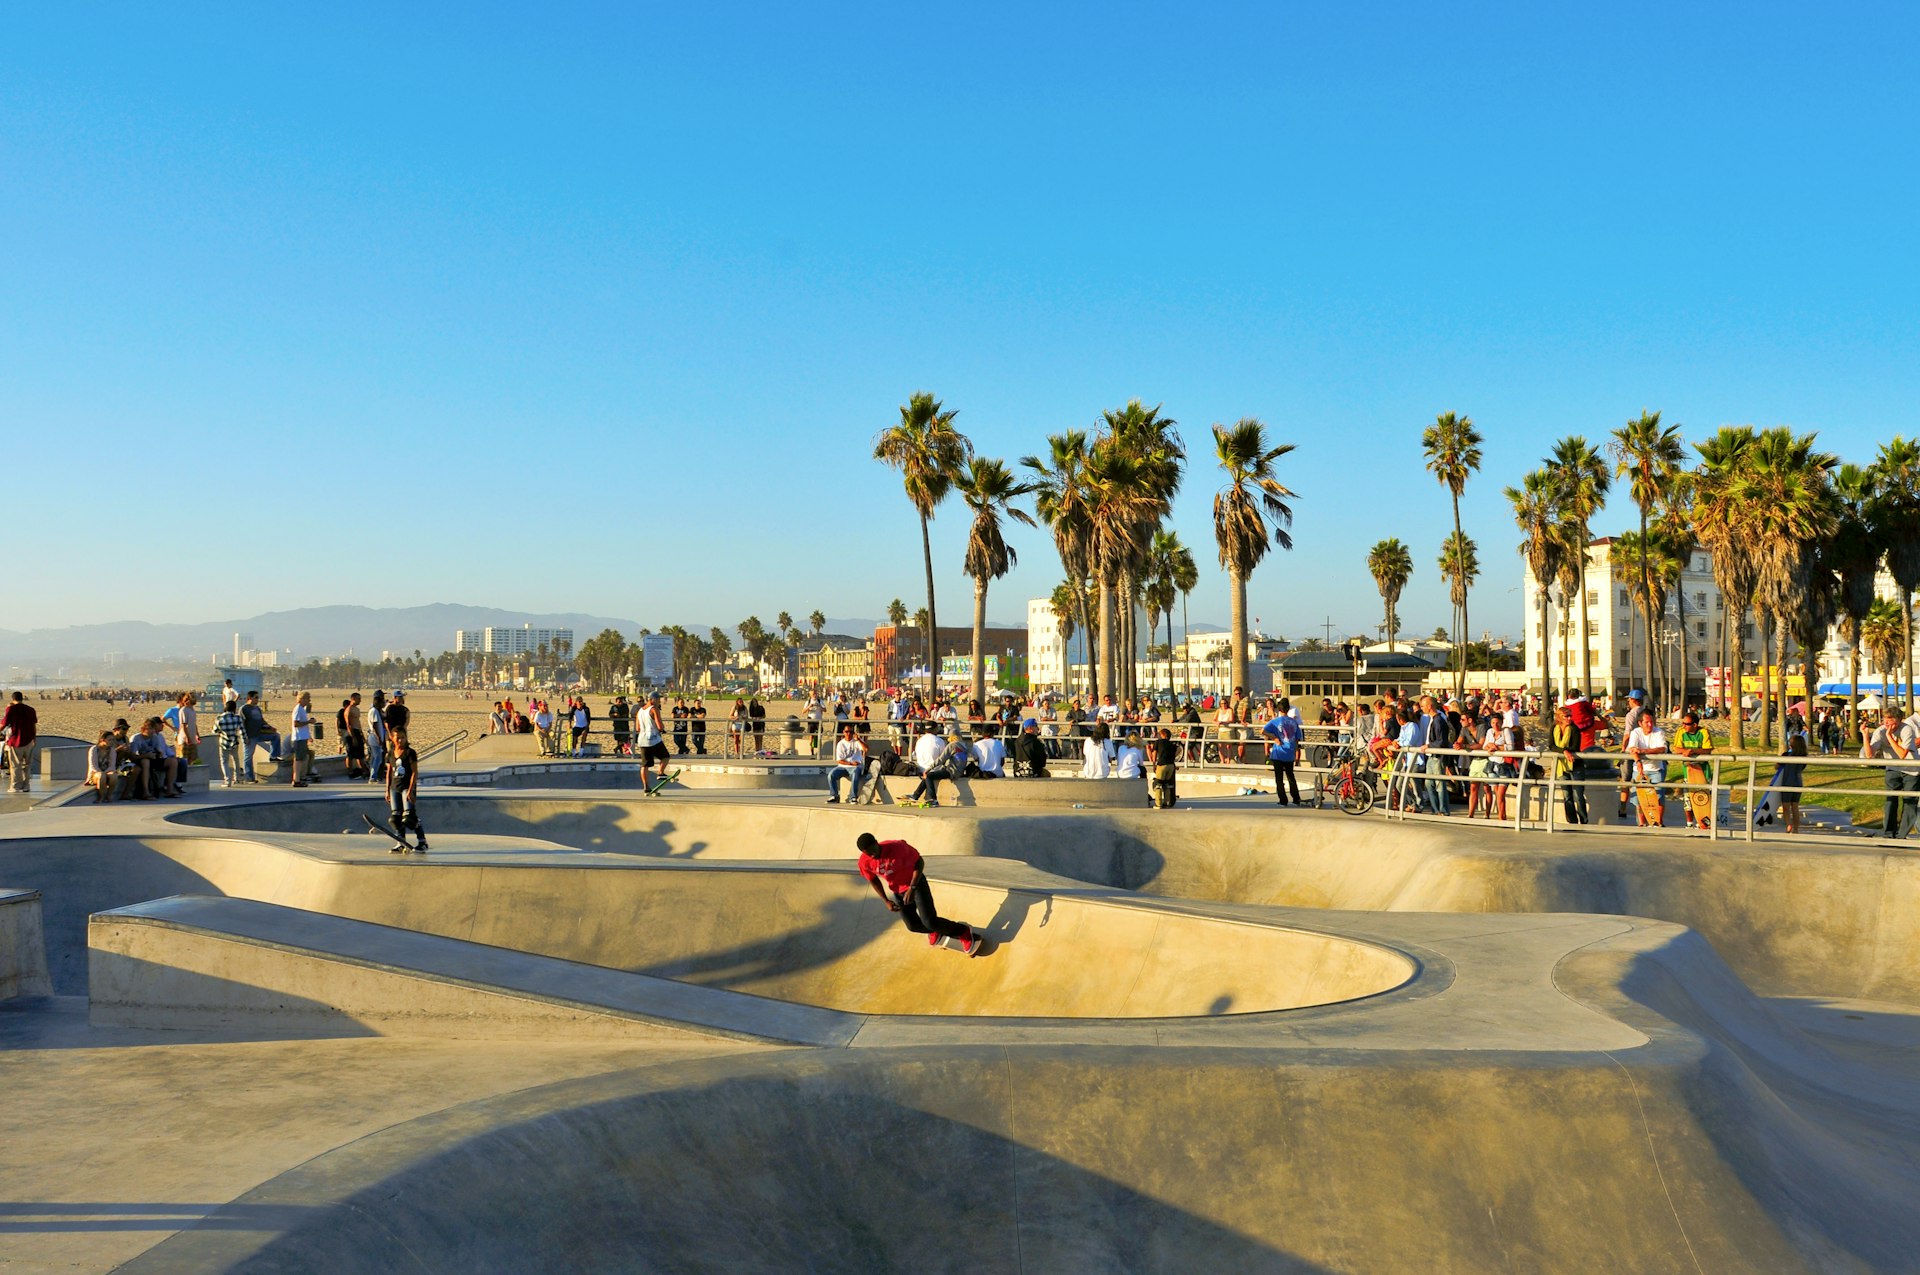 Skateboarders ride down ramps at a skatepark on the edge of a palm-lined beach